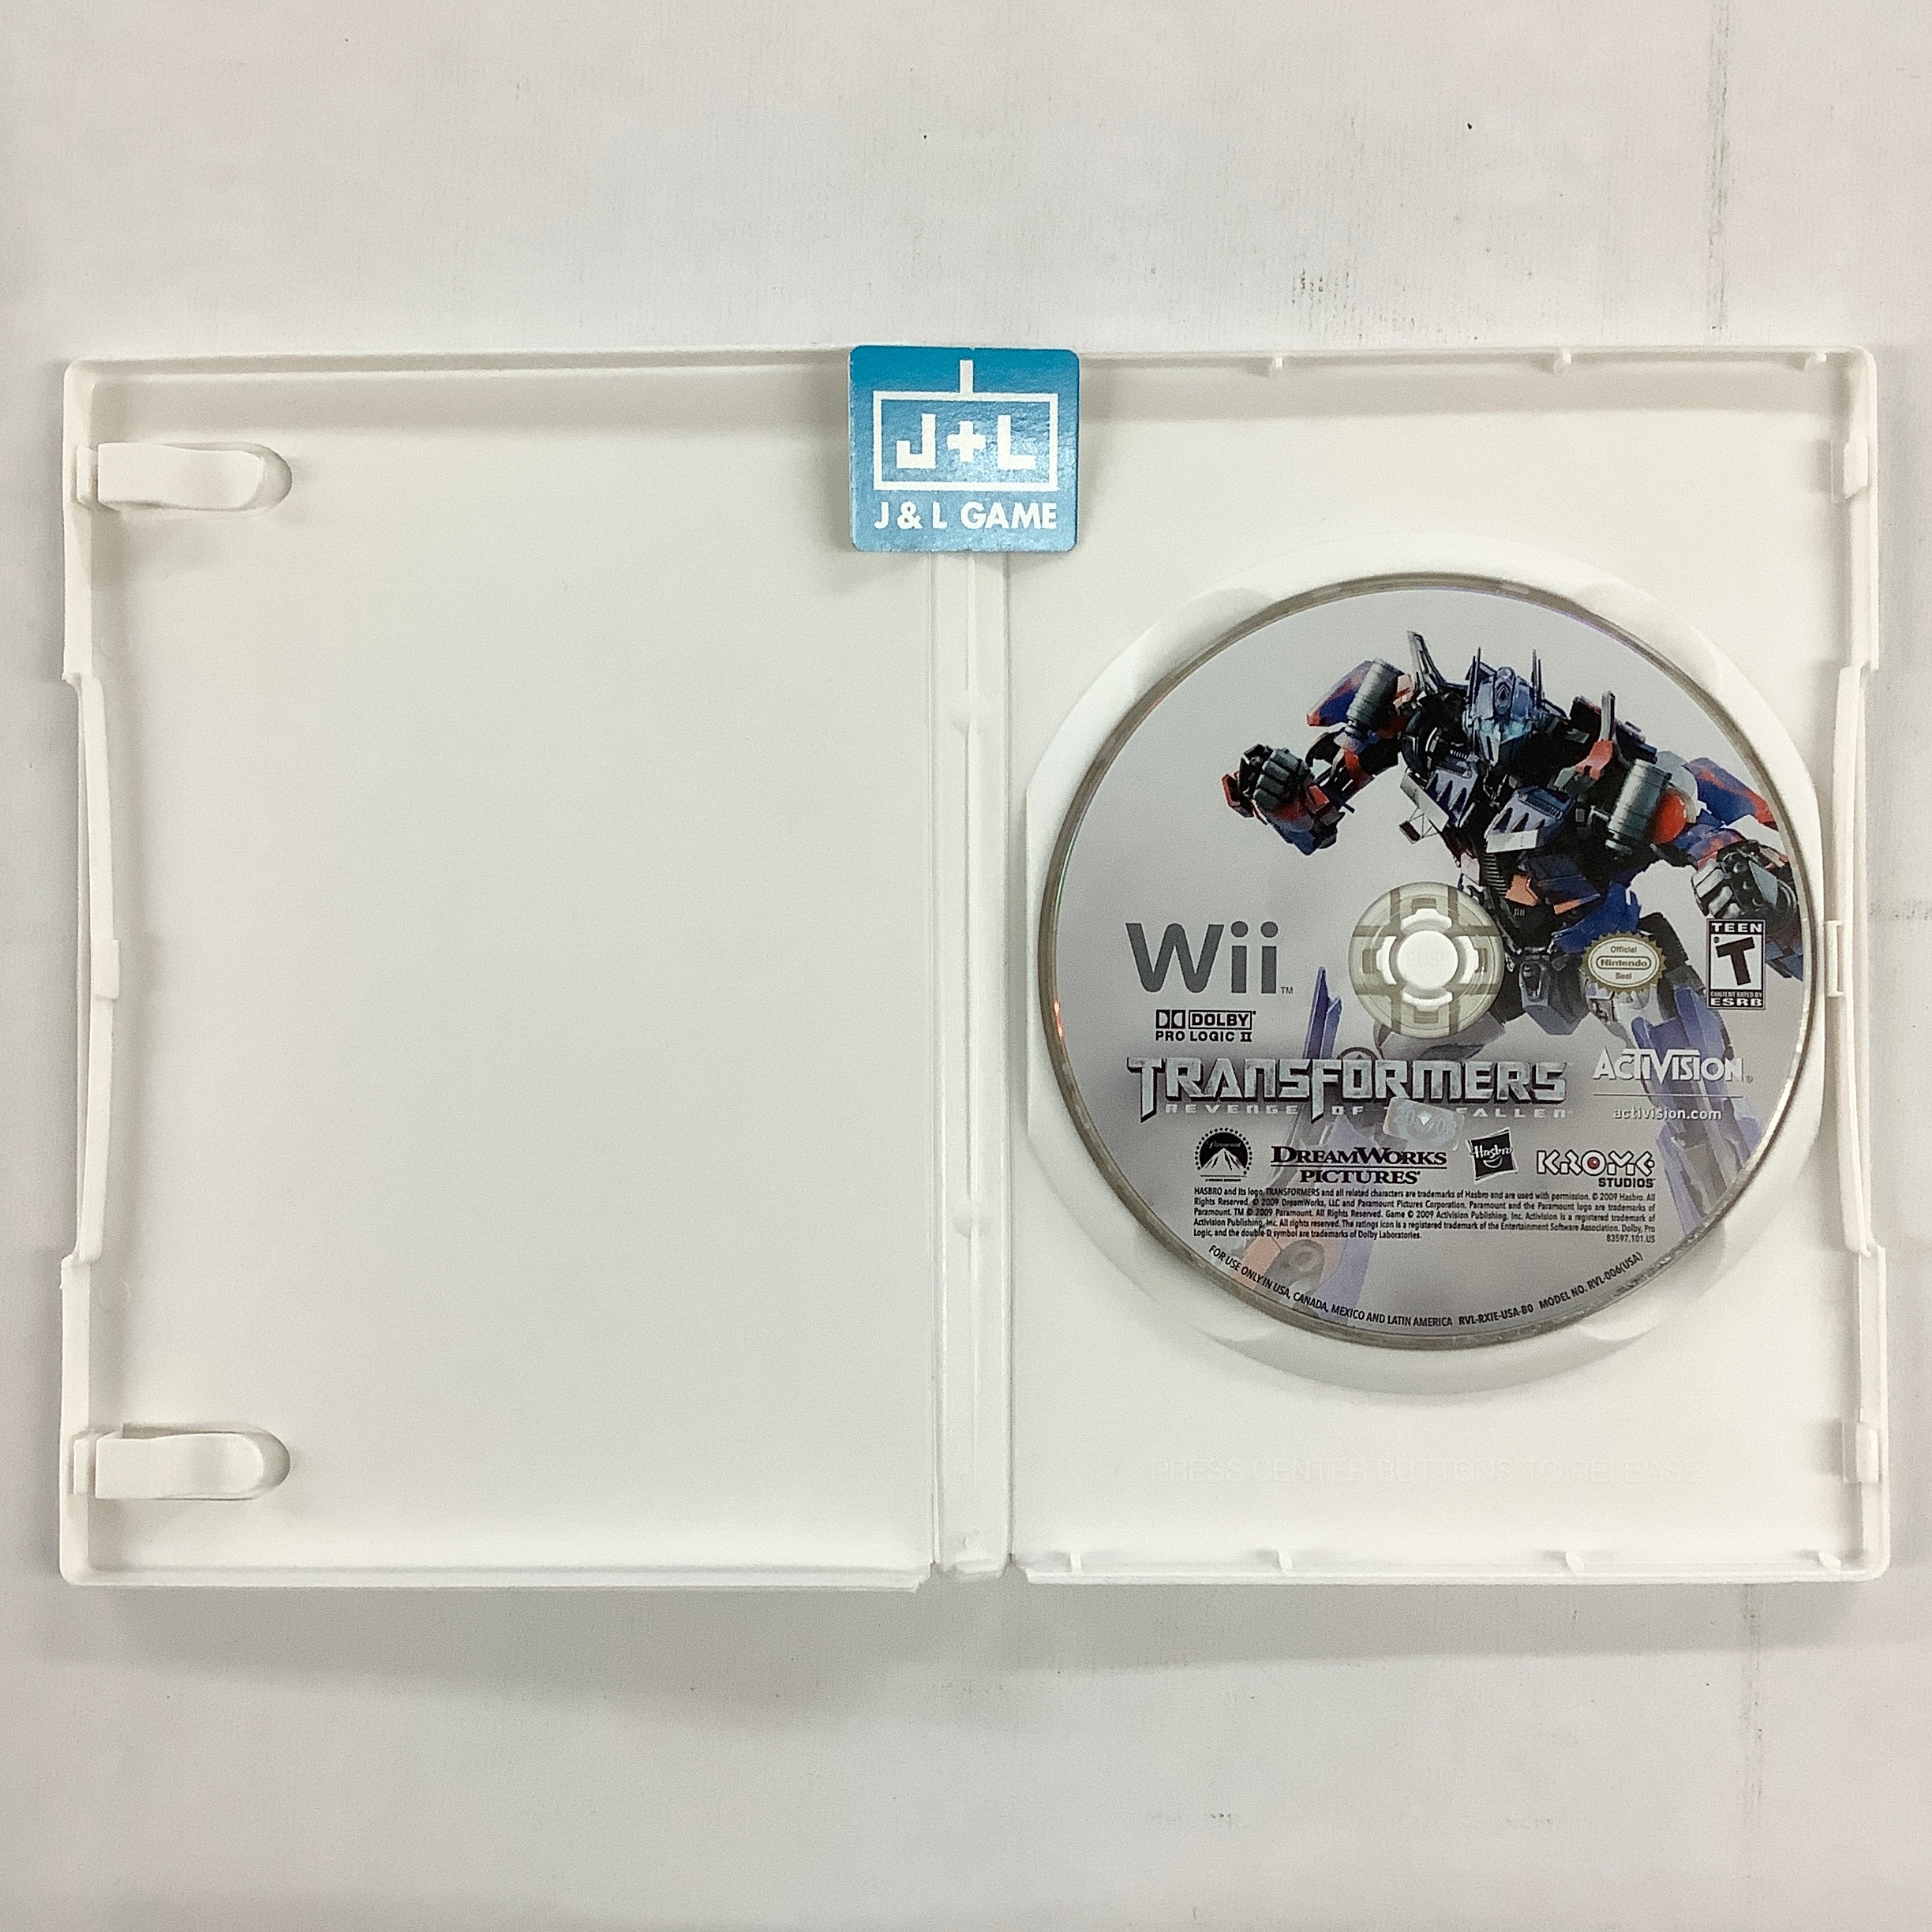 Transformers: Revenge of the Fallen - Nintendo Wii [Pre-Owned] Video Games Activision   